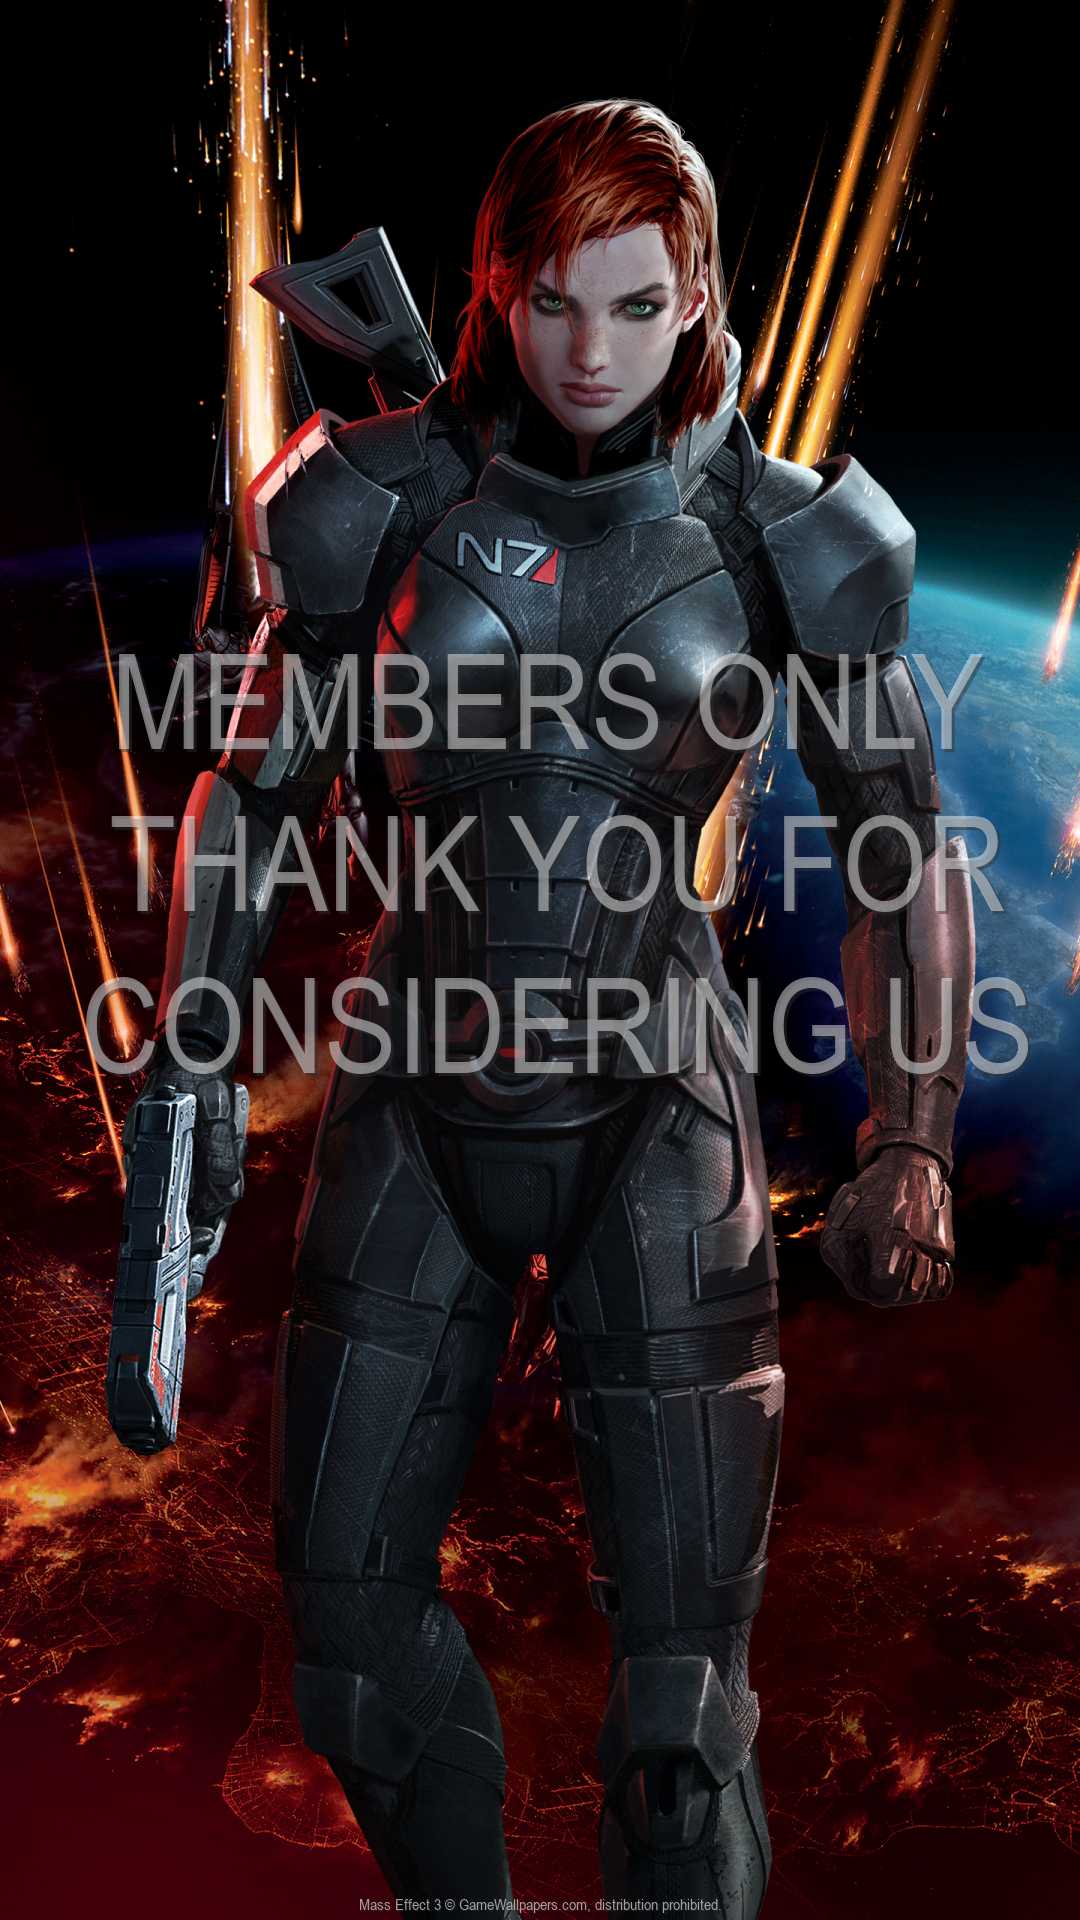 Mass Effect 3 1080p%20Vertical Mobile wallpaper or background 11